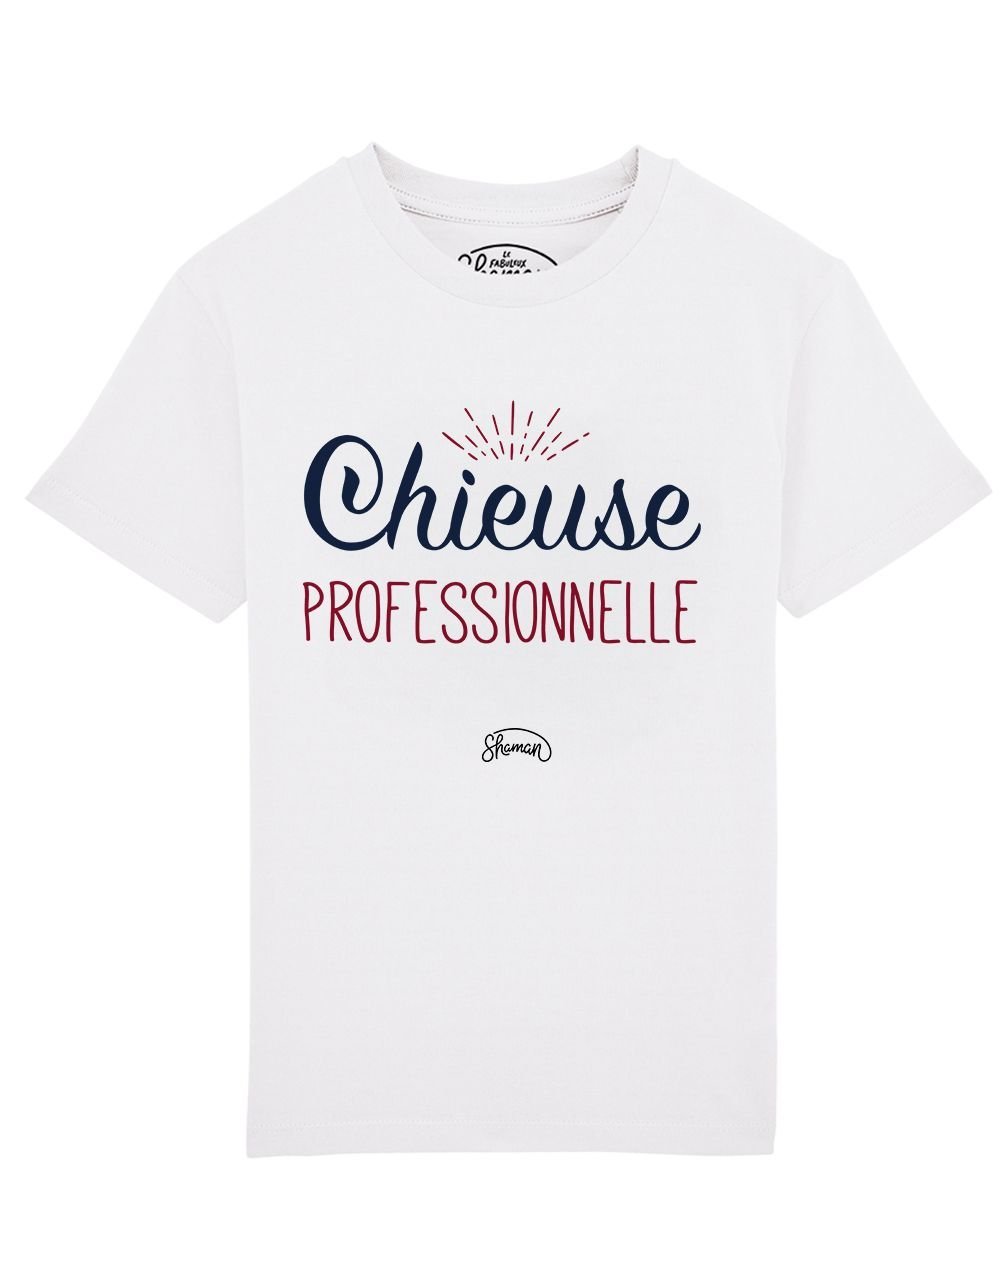 Tee shirt Chieuse pro